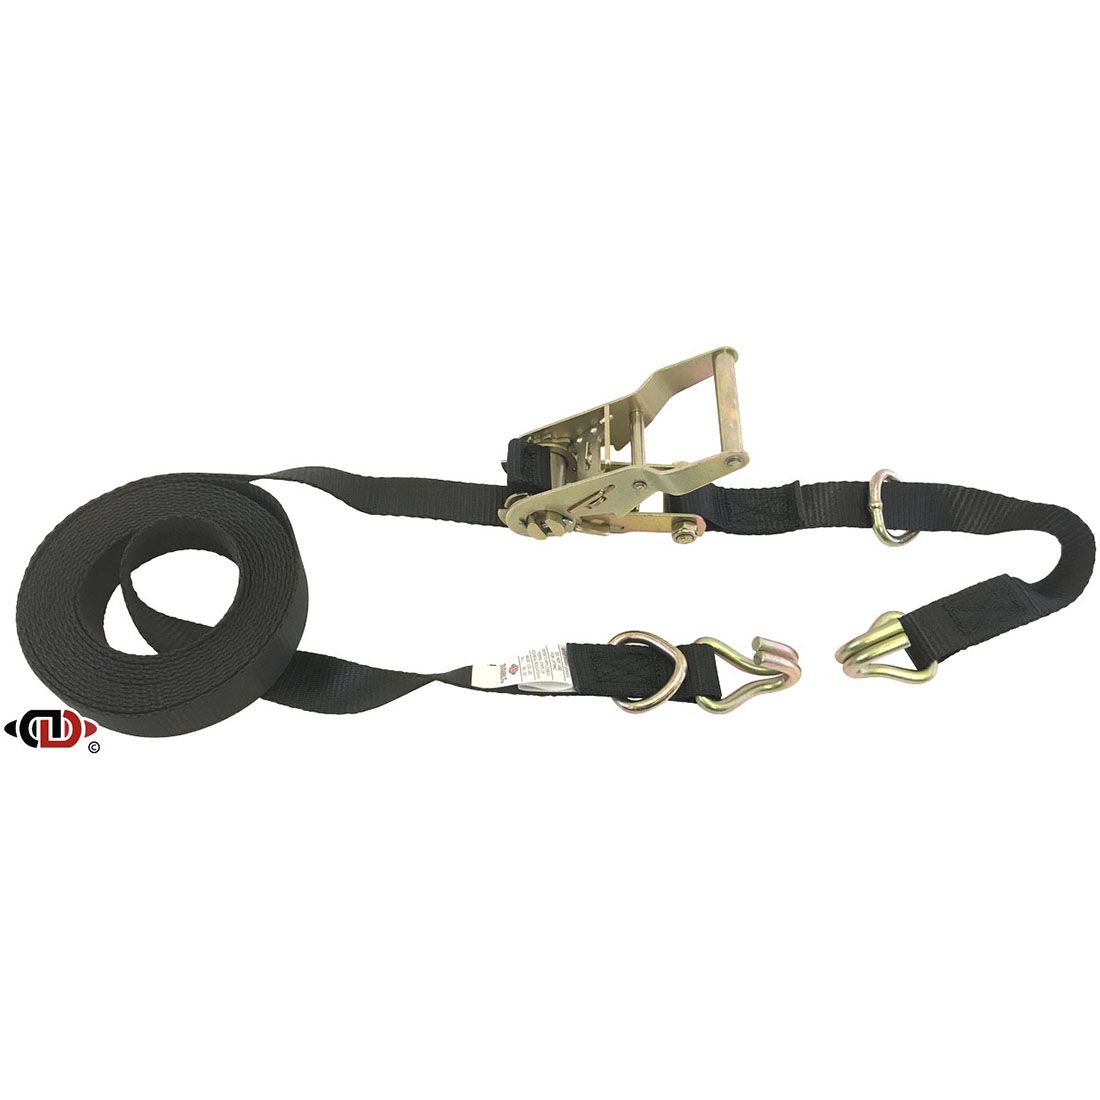 Ratchet Straps Tie Down 25/50mm 1-10 Meters Claw Lorry Lashing Handy Straps 